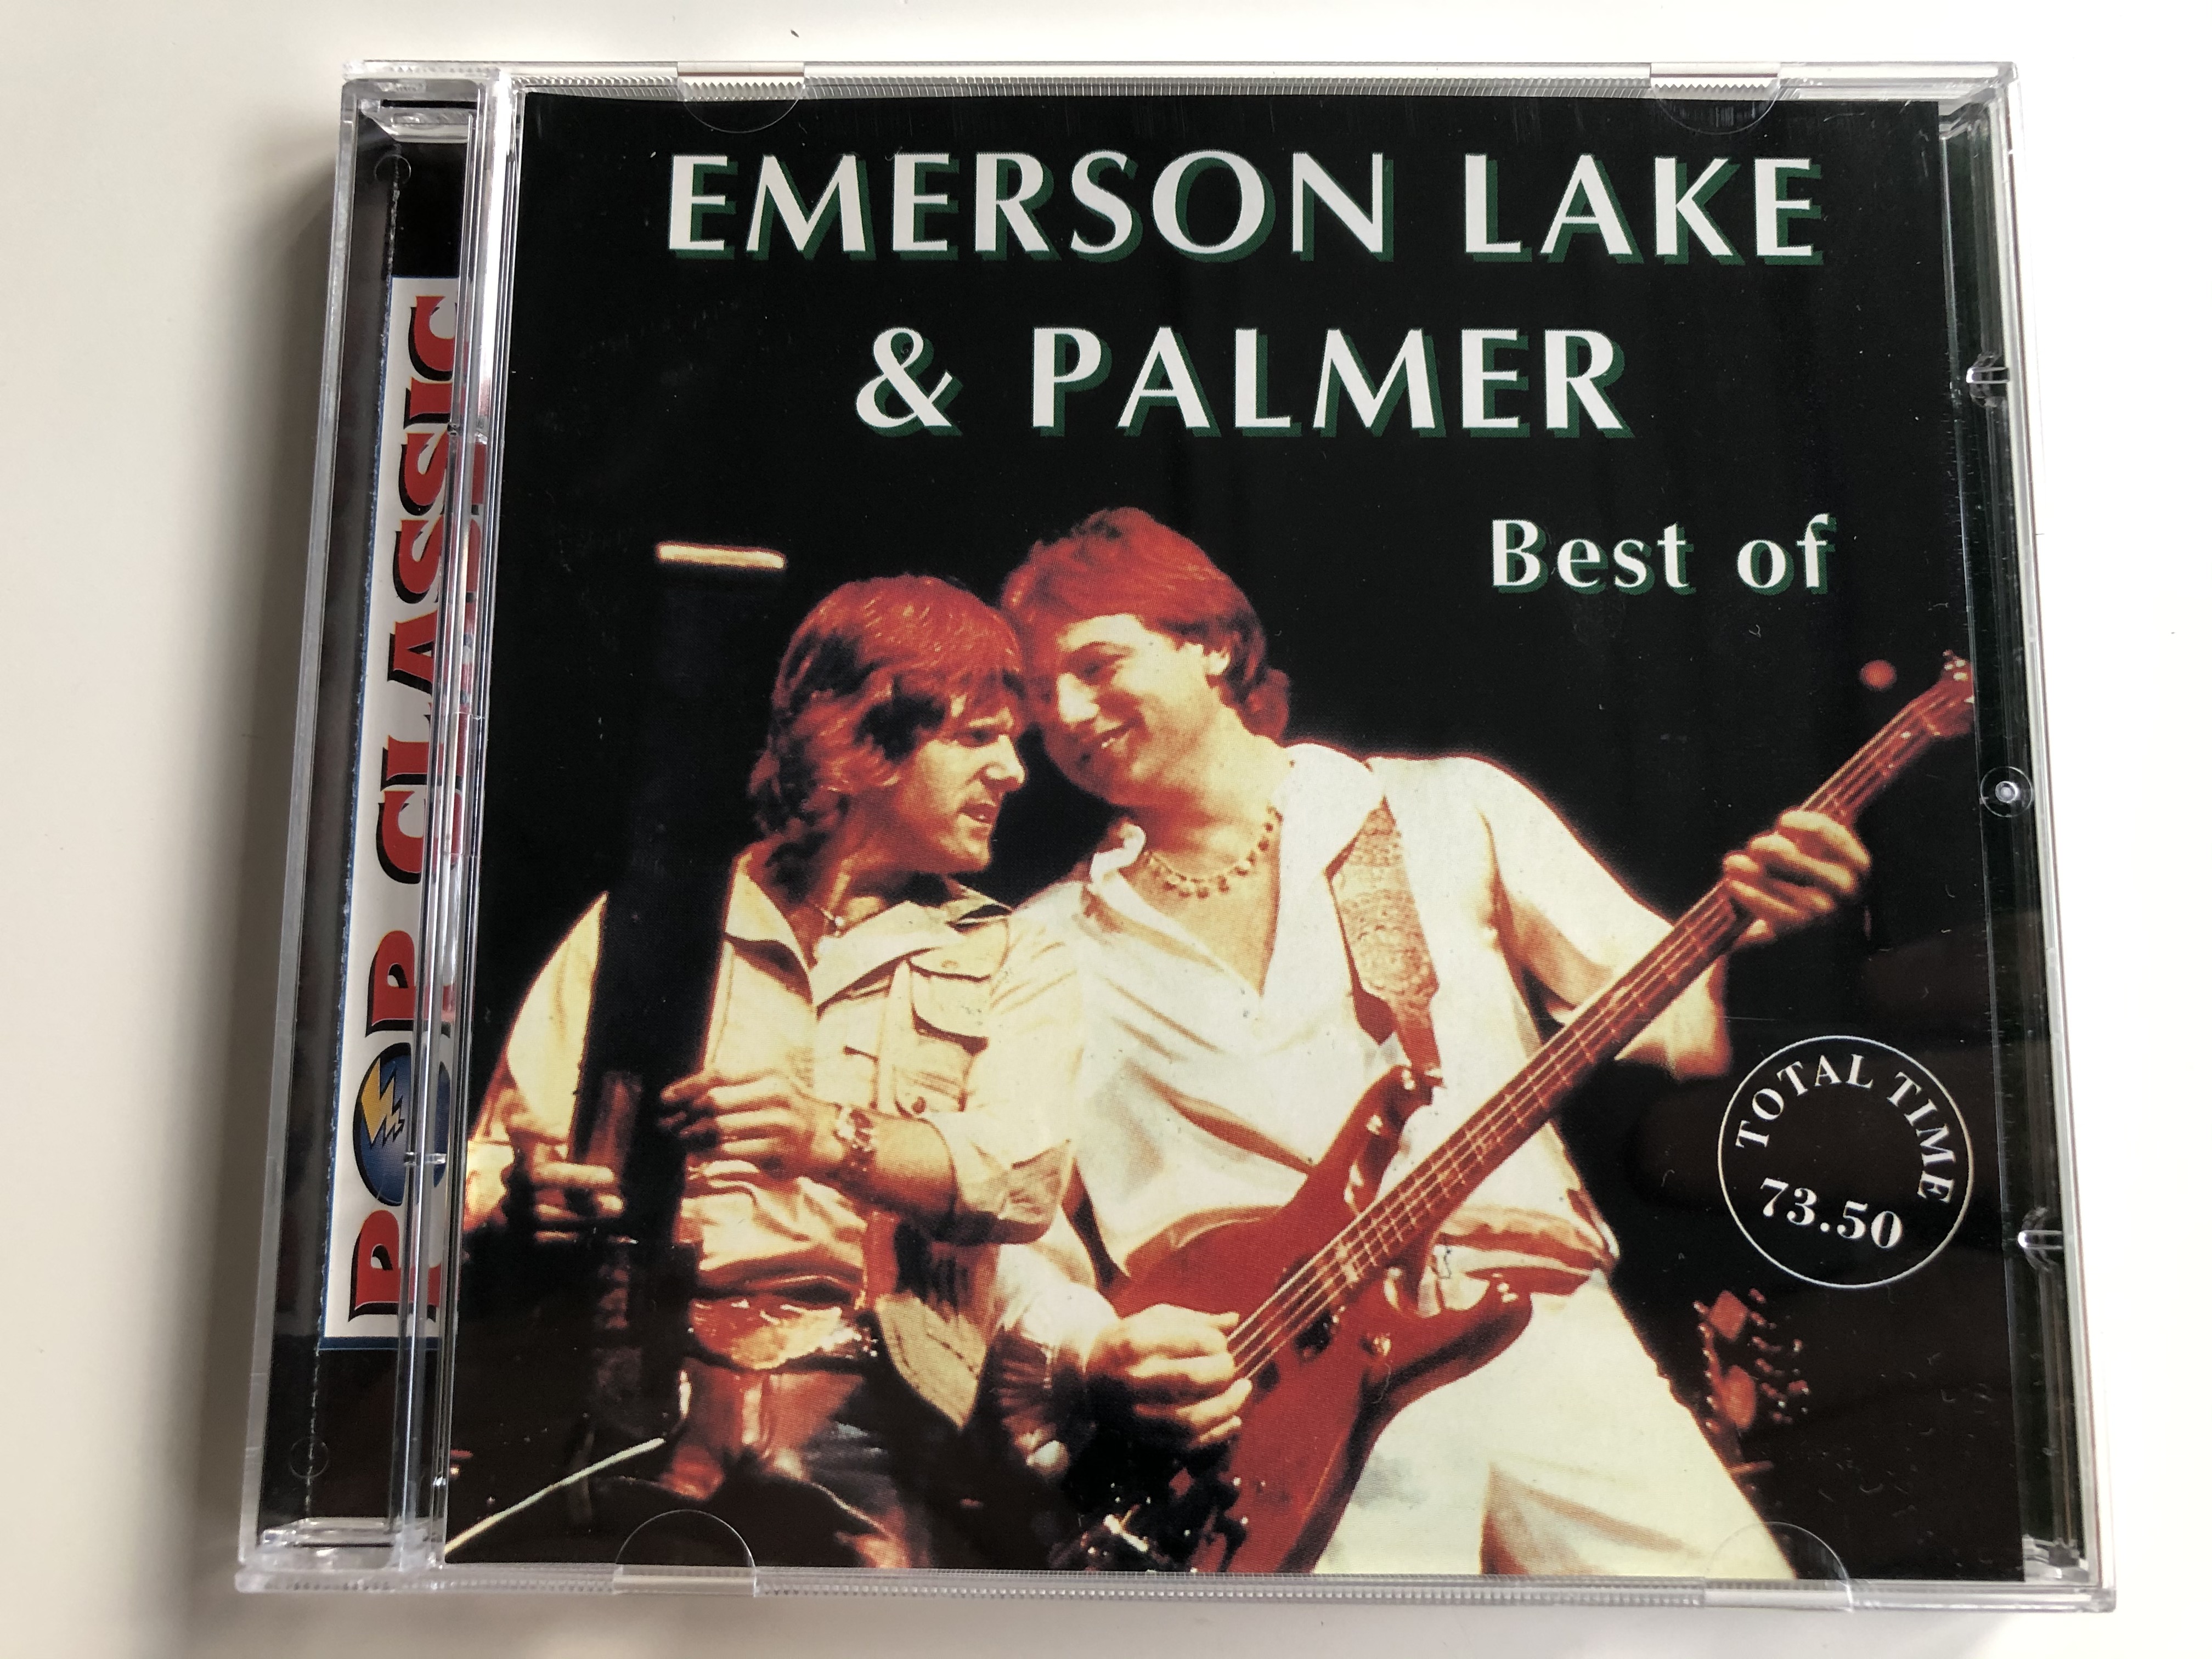 Emerson Lake & Palmer - Best Of / Total Time: 73.50 / Pop Classic / Euroton  Audio CD / EUCD-0076 - Bible in My Language